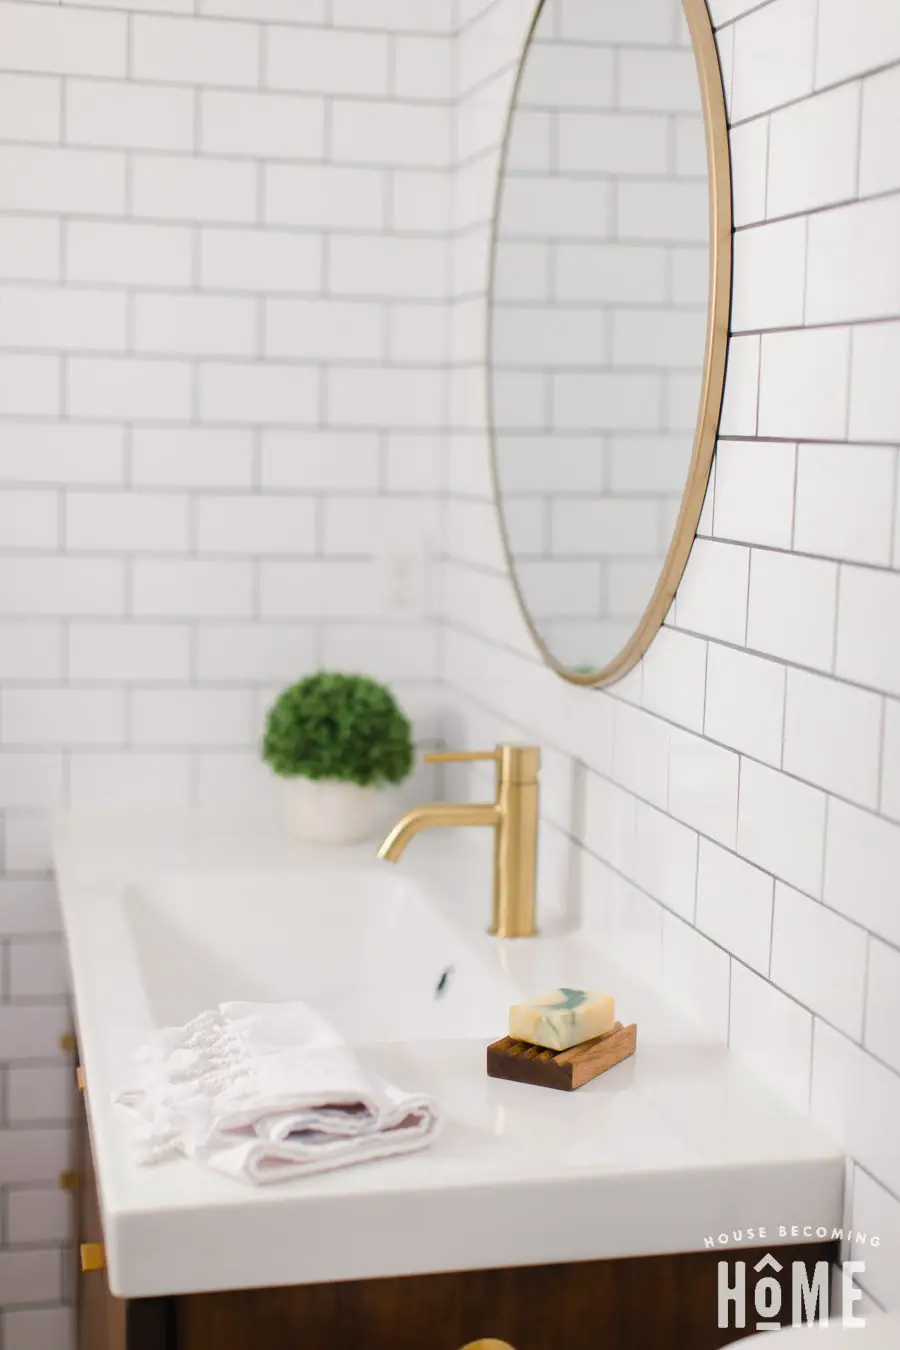 Small Bathroom Renovation After Shot on House Becoming Home : floating wood vanity, white subway tile, brass faucet and white countertop